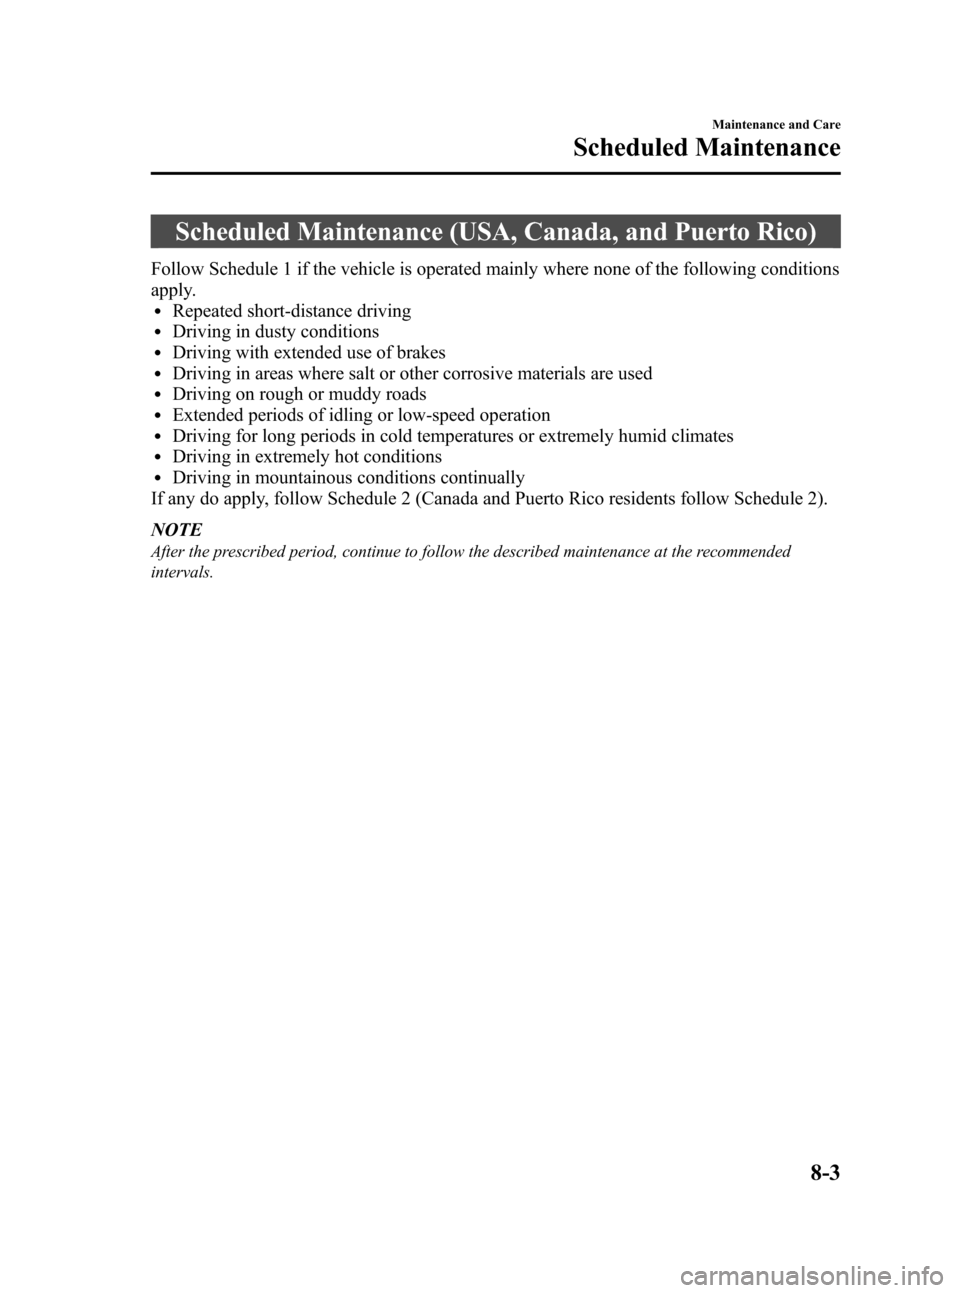 MAZDA MODEL 3 HATCHBACK 2010  Owners Manual (in English) Black plate (367,1)
Scheduled Maintenance (USA, Canada, and Puerto Rico)
Follow Schedule 1 if the vehicle is operated mainly where none of the following conditions
apply.
lRepeated short-distance driv